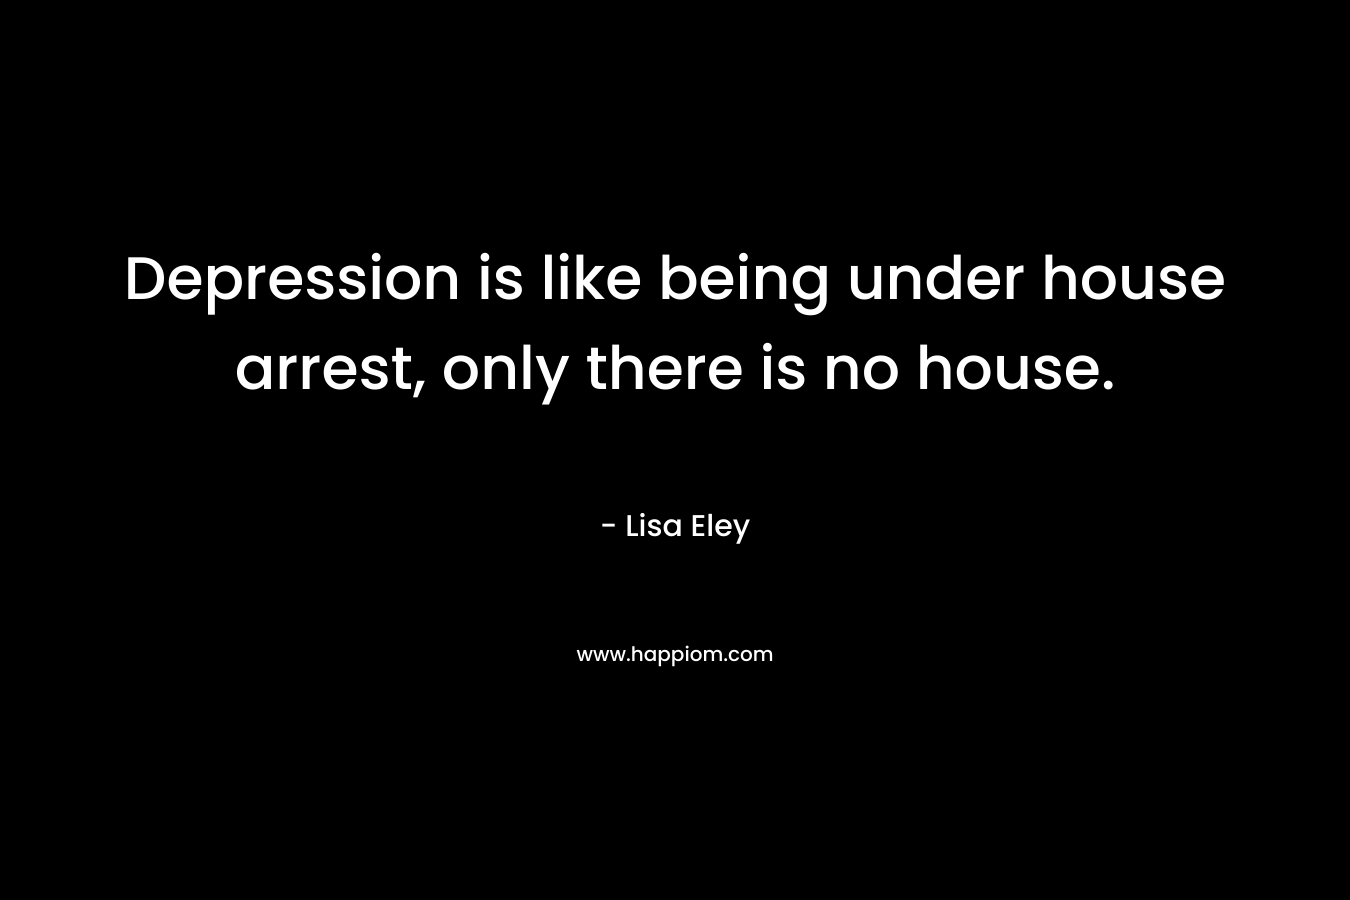 Depression is like being under house arrest, only there is no house.